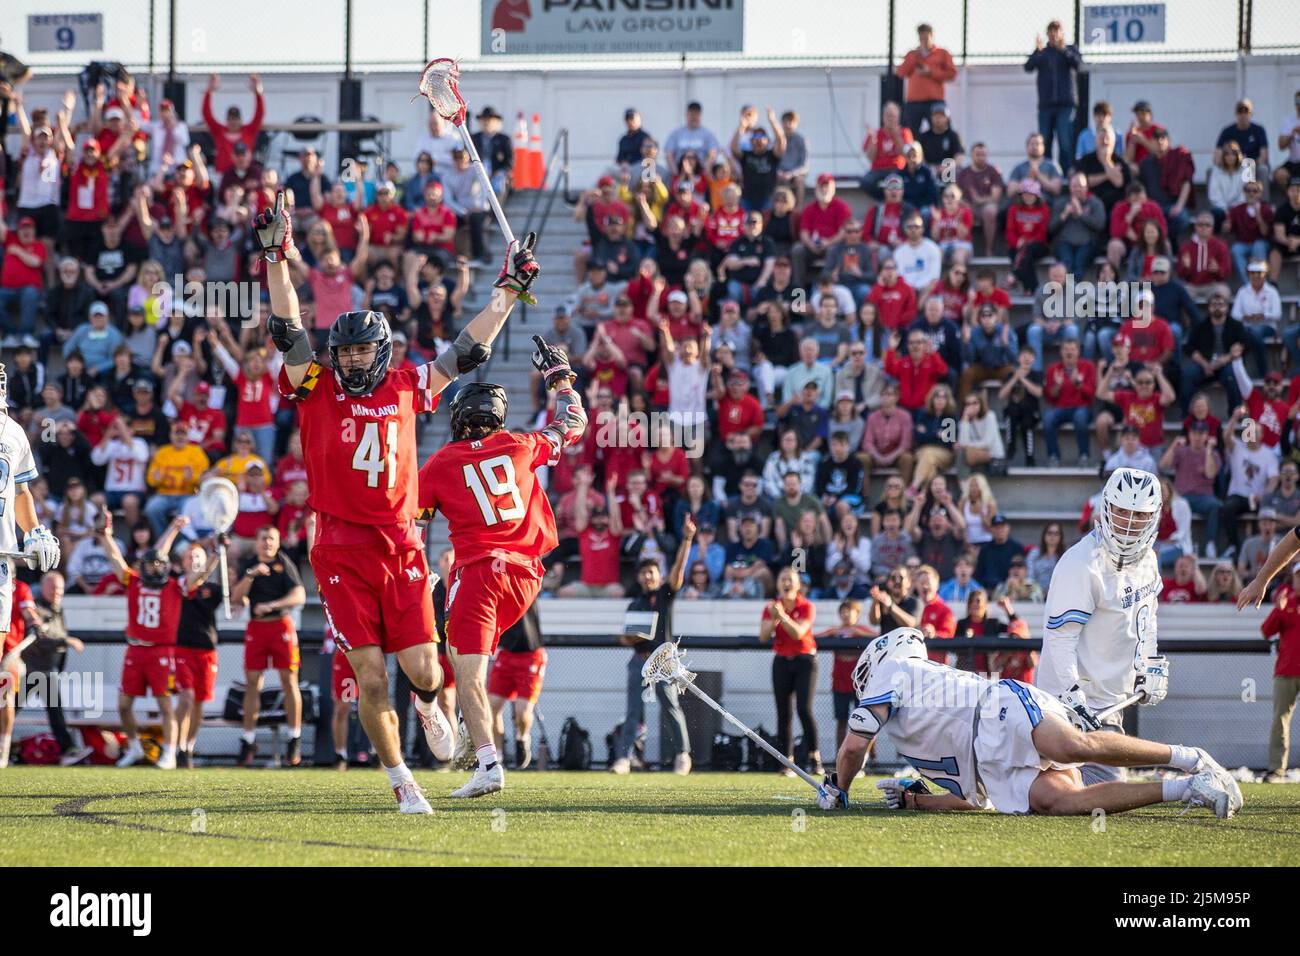 April 23, 2022: Maryland midfielder Jack Brennan (41) attacks the net and scores during the ncaa men's lacrosse regular season finale between the Maryland Terrapins and the Johns Hopkins Blue Jays at Homewood Field in Baltimore, Maryland Photographer: Cory Royster Stock Photo